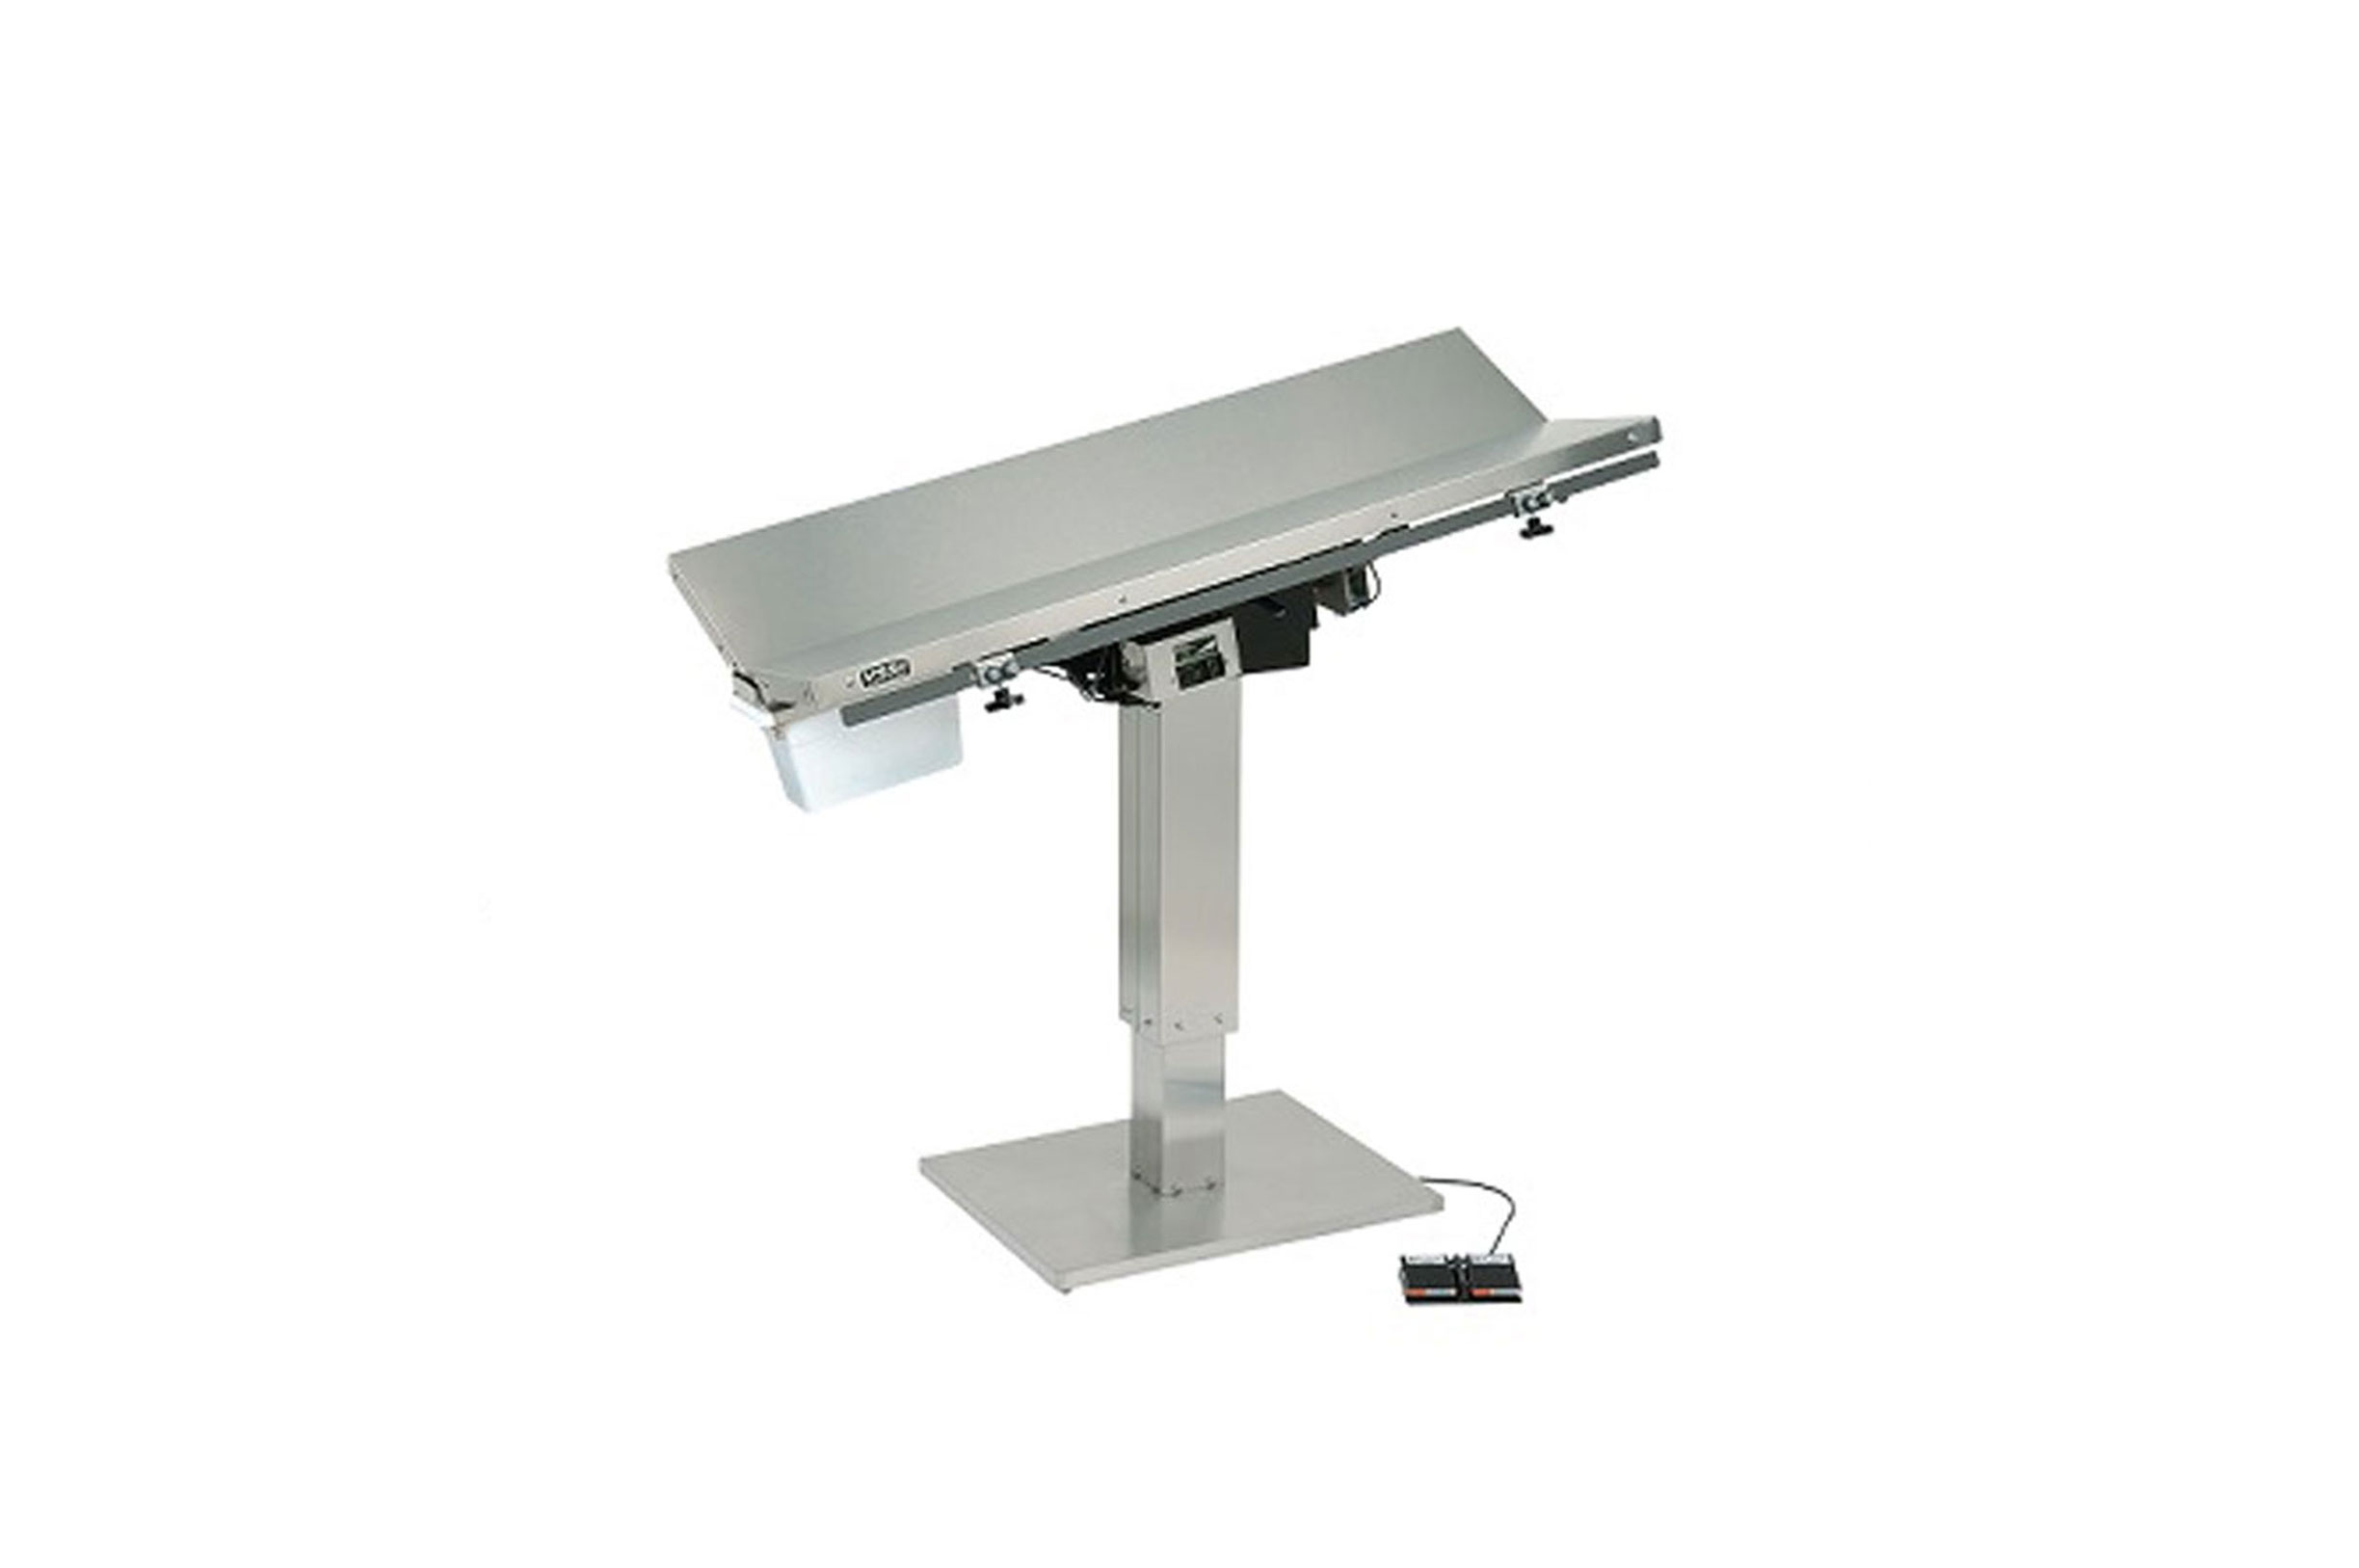 v-top-surgery-table-with-adjustable-electric-column12d6adc1a7814b27bc5366c3ee1bcade